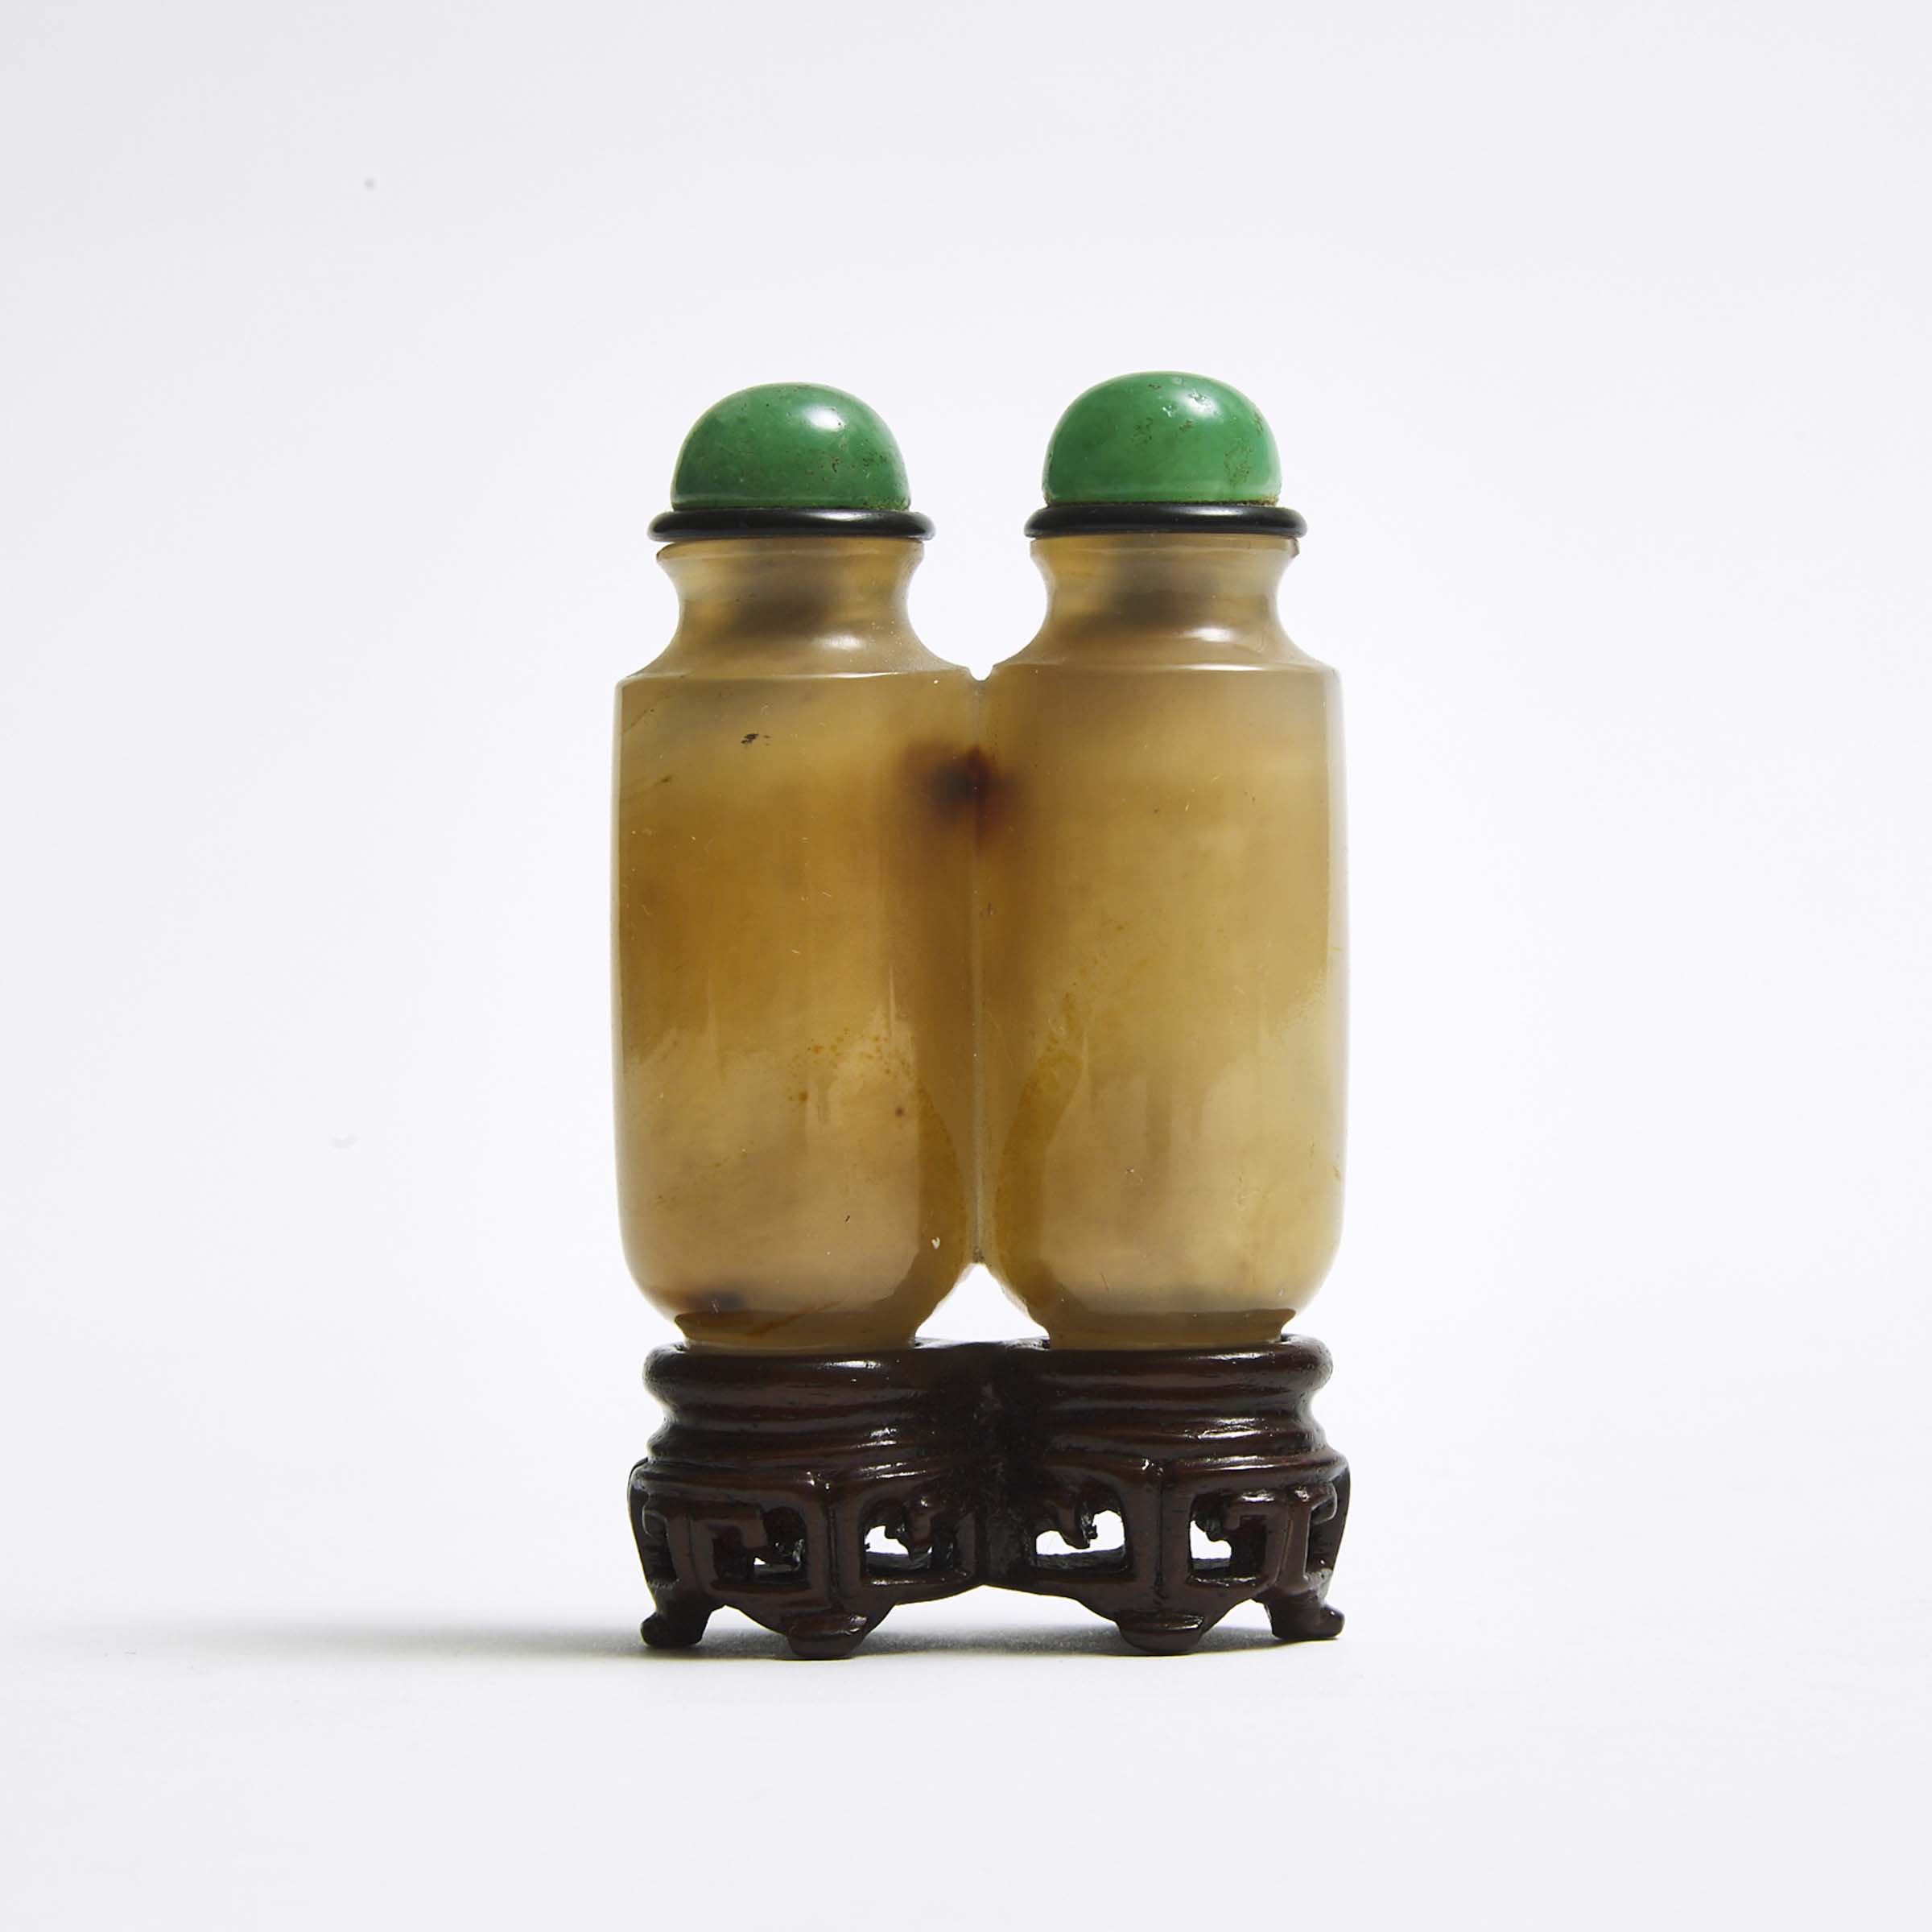 A Double-Vase Agate Snuff Bottle, Qing Dynasty